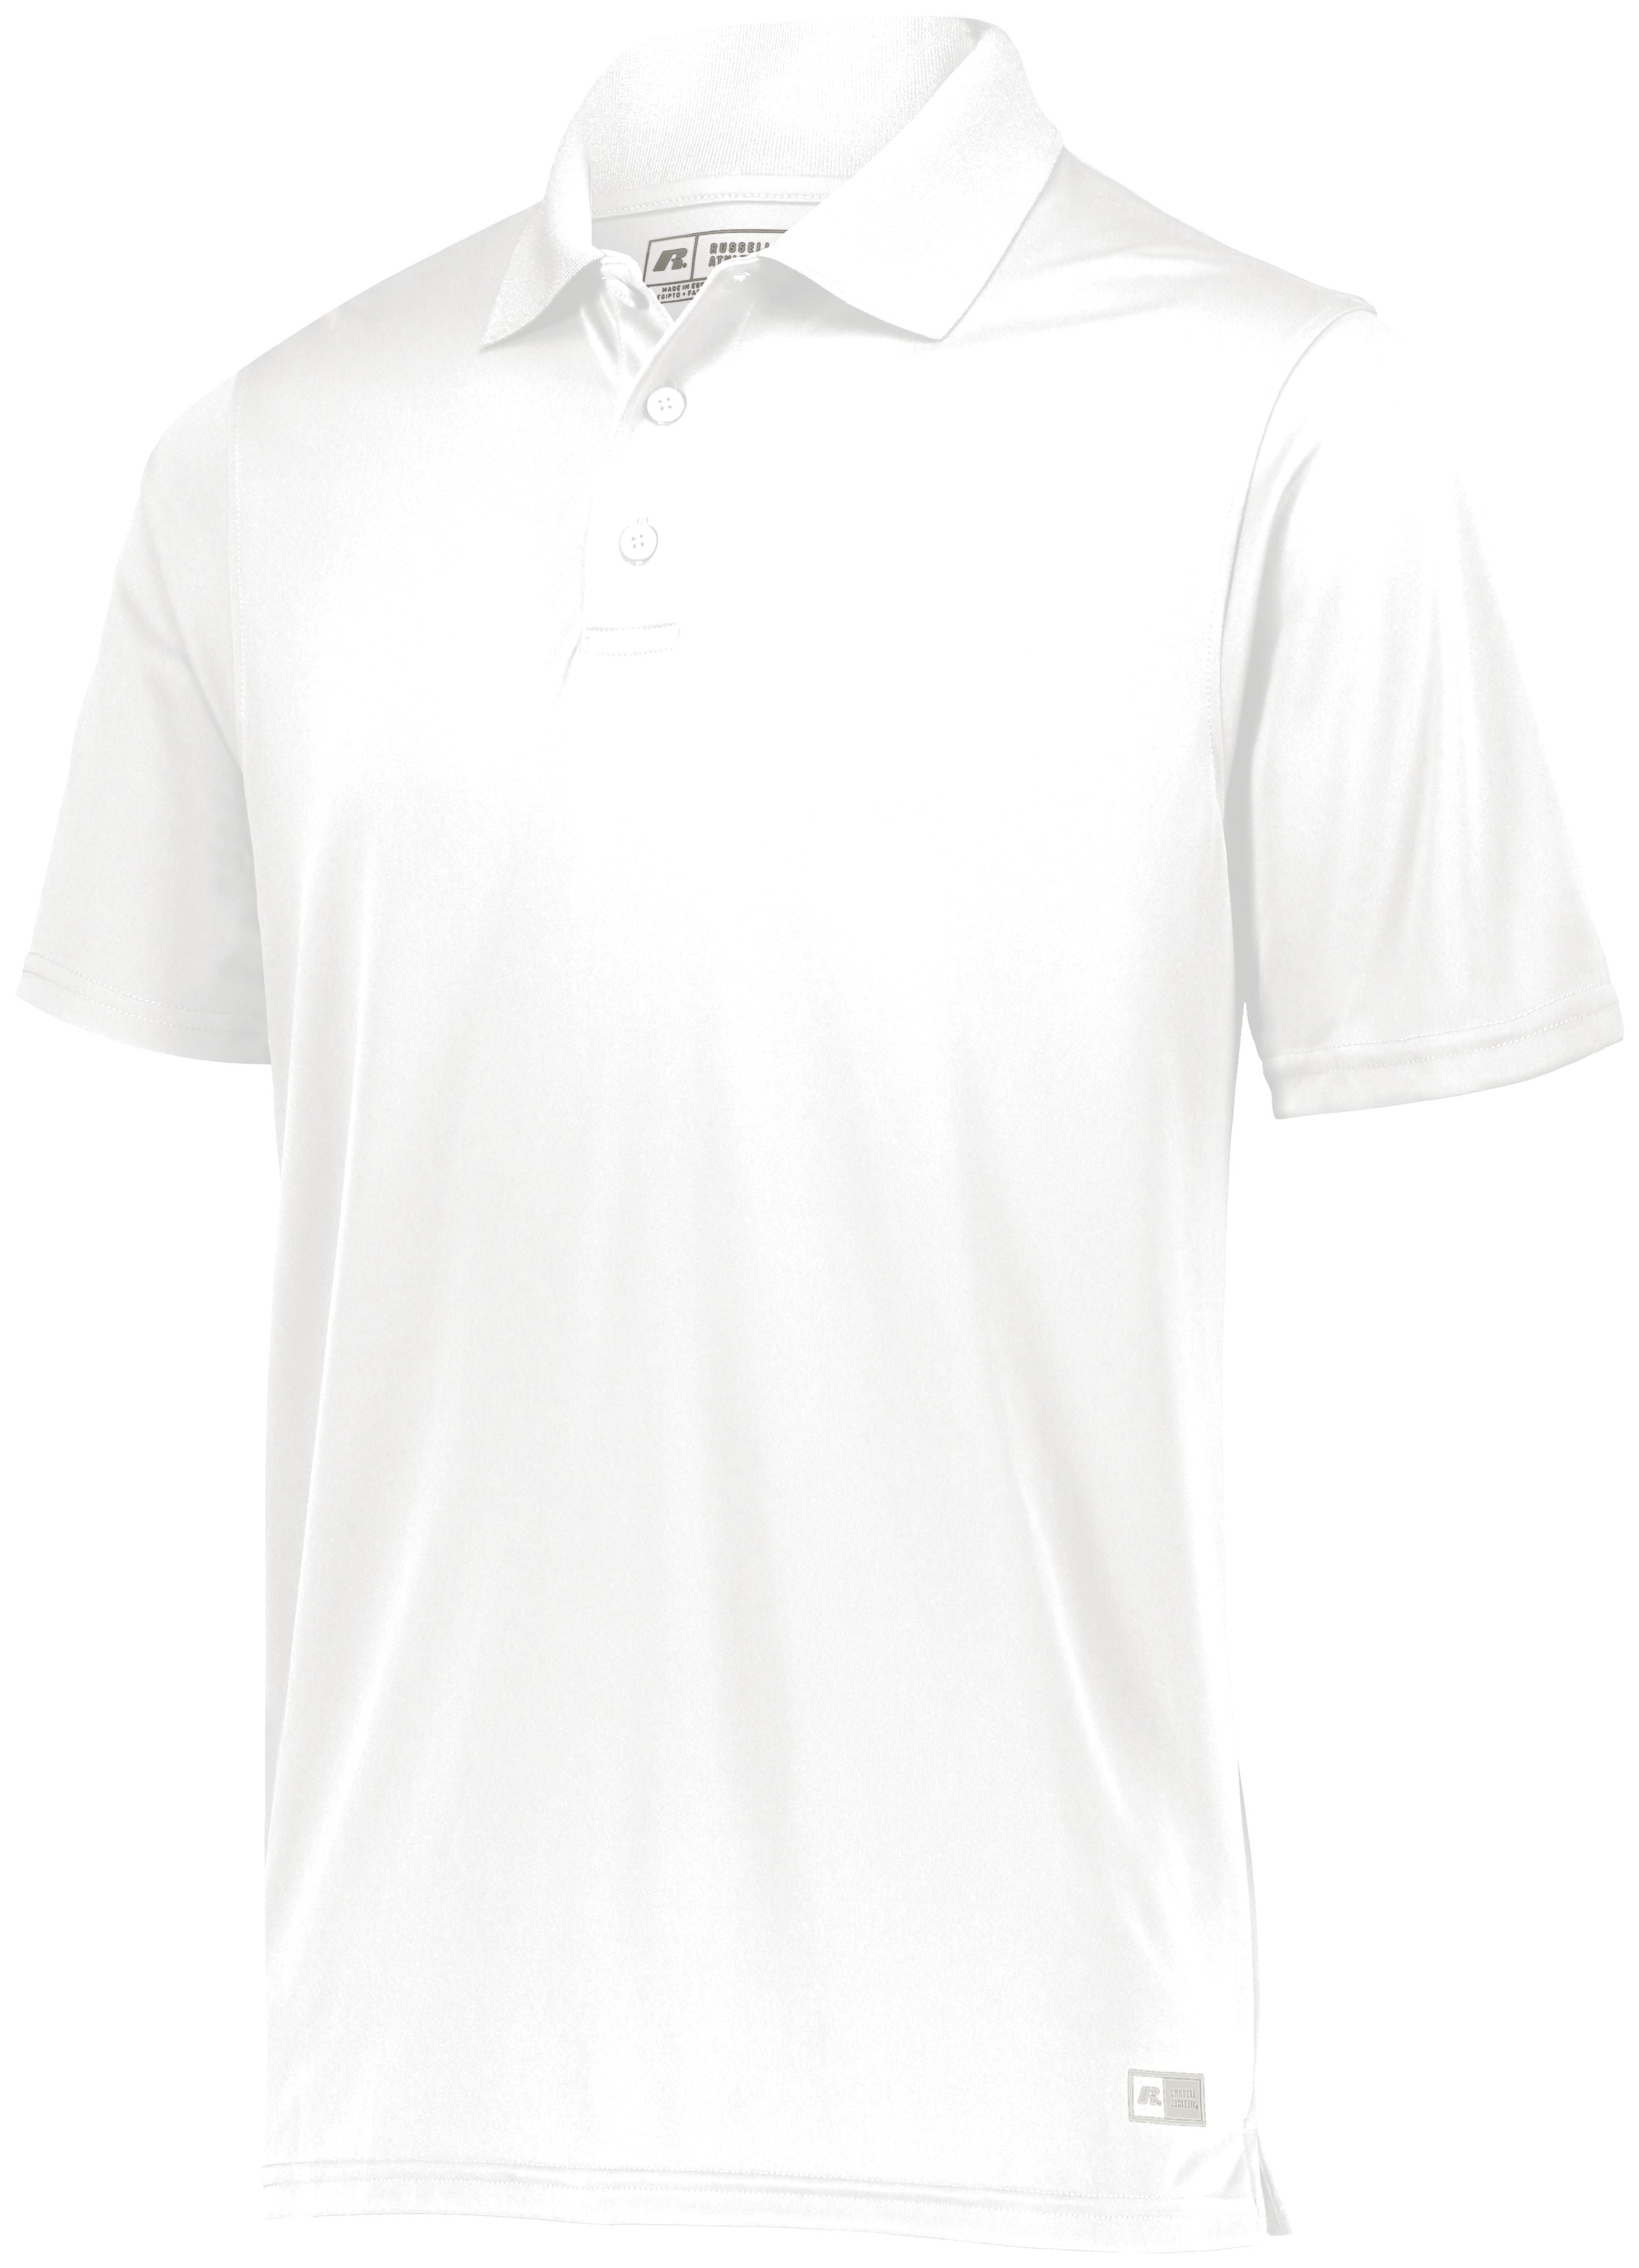 Russell Athletic Essential Polo in White  -Part of the Adult, Adult-Polos, Polos, Russell-Athletic-Products, Shirts, Corporate-Collection product lines at KanaleyCreations.com